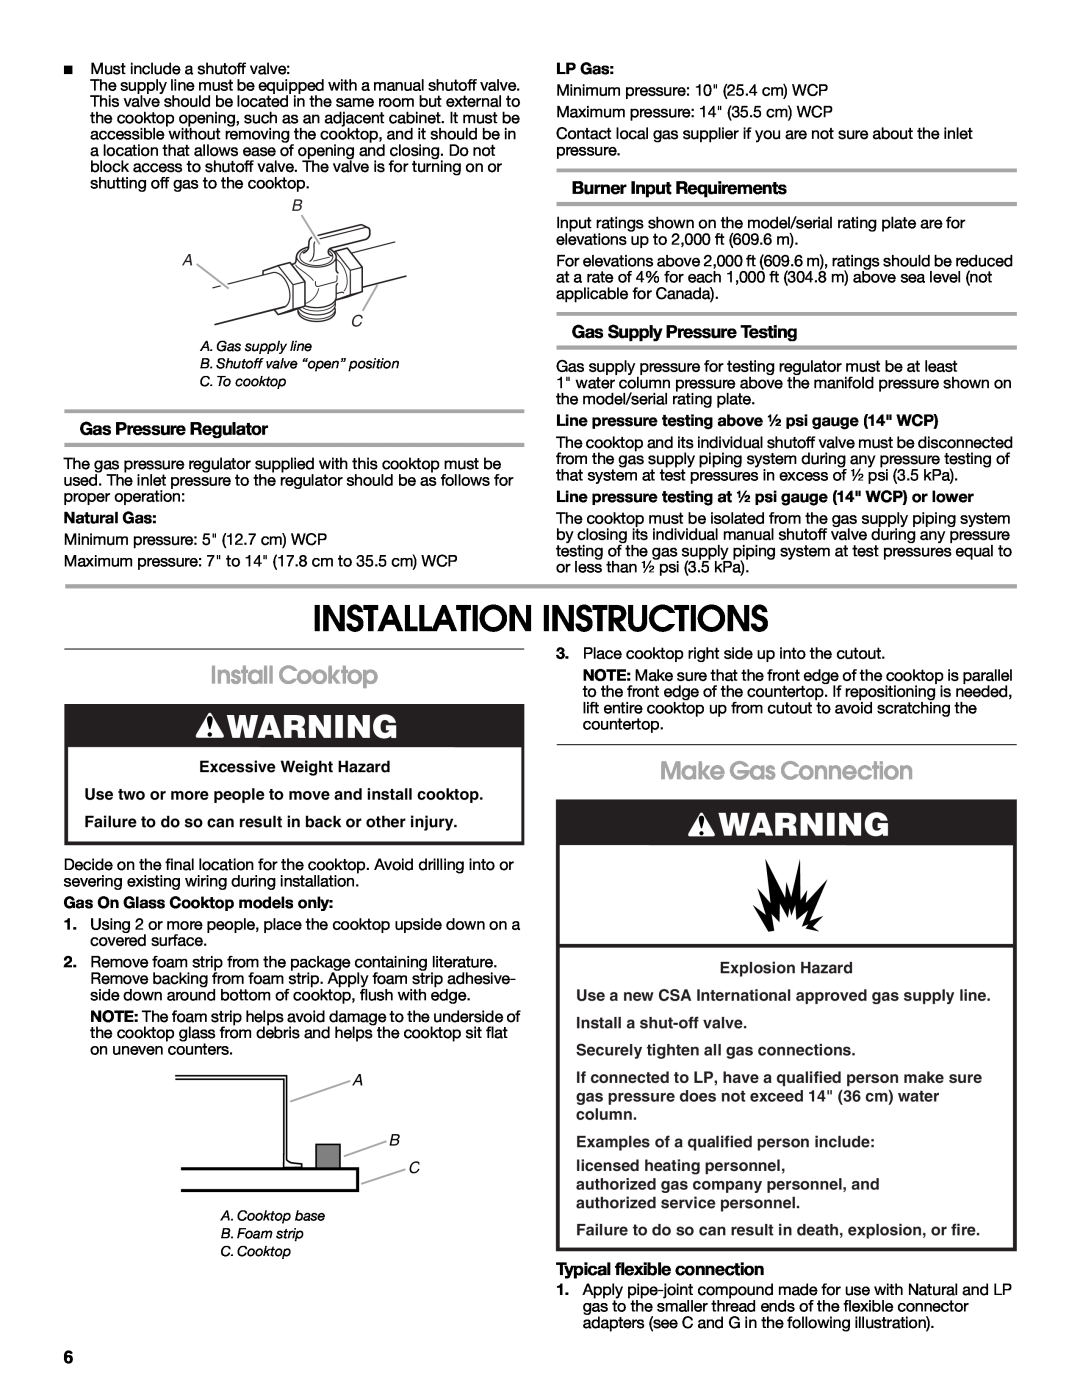 Maytag W10268392A Installation Instructions, Install Cooktop, Make Gas Connection, Gas Pressure Regulator, B A C, LP Gas 